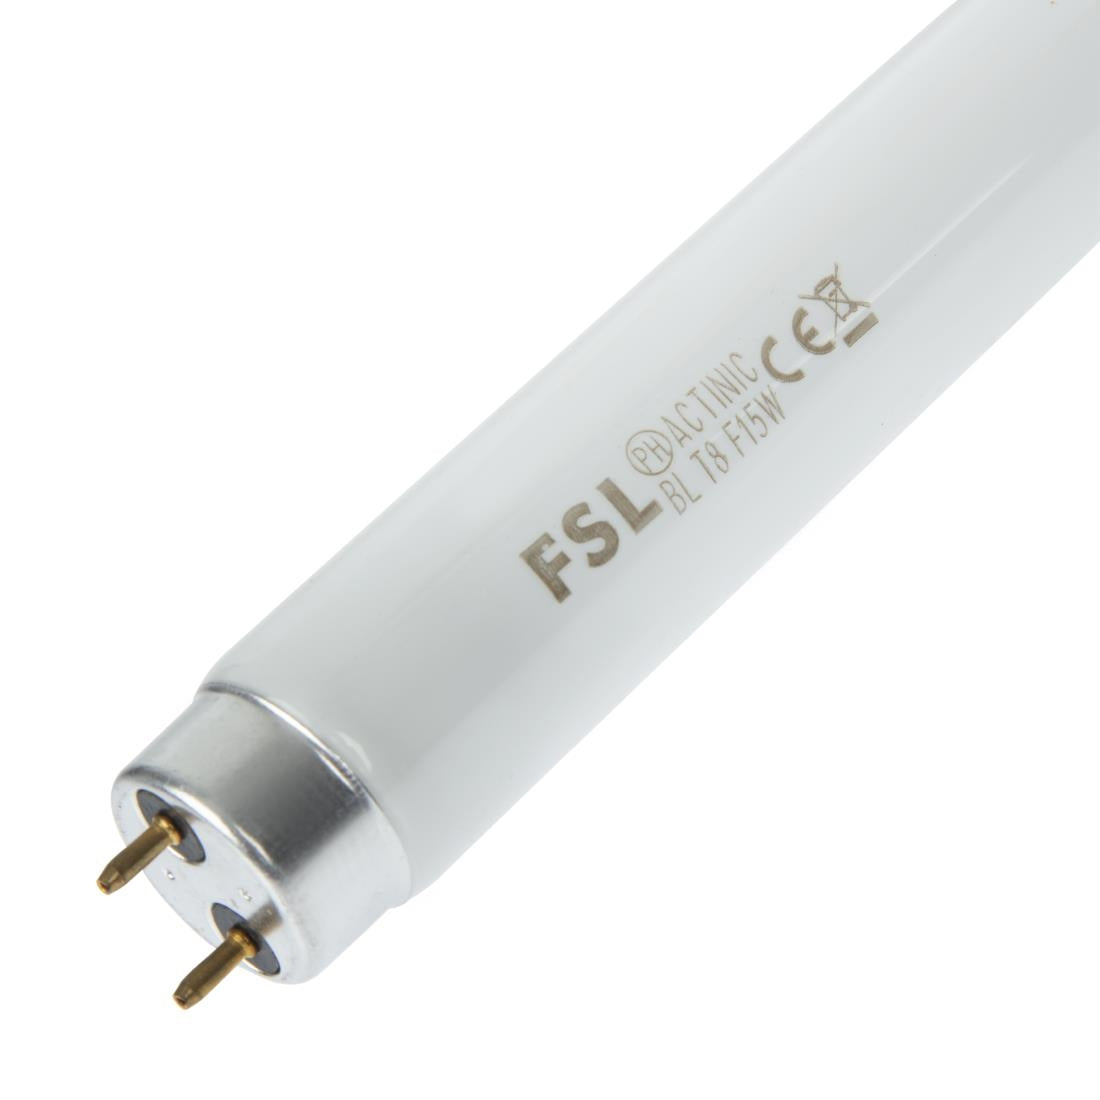 P149 Replacement 15W Fluorescent Tube for Eazyzap Fly Killers